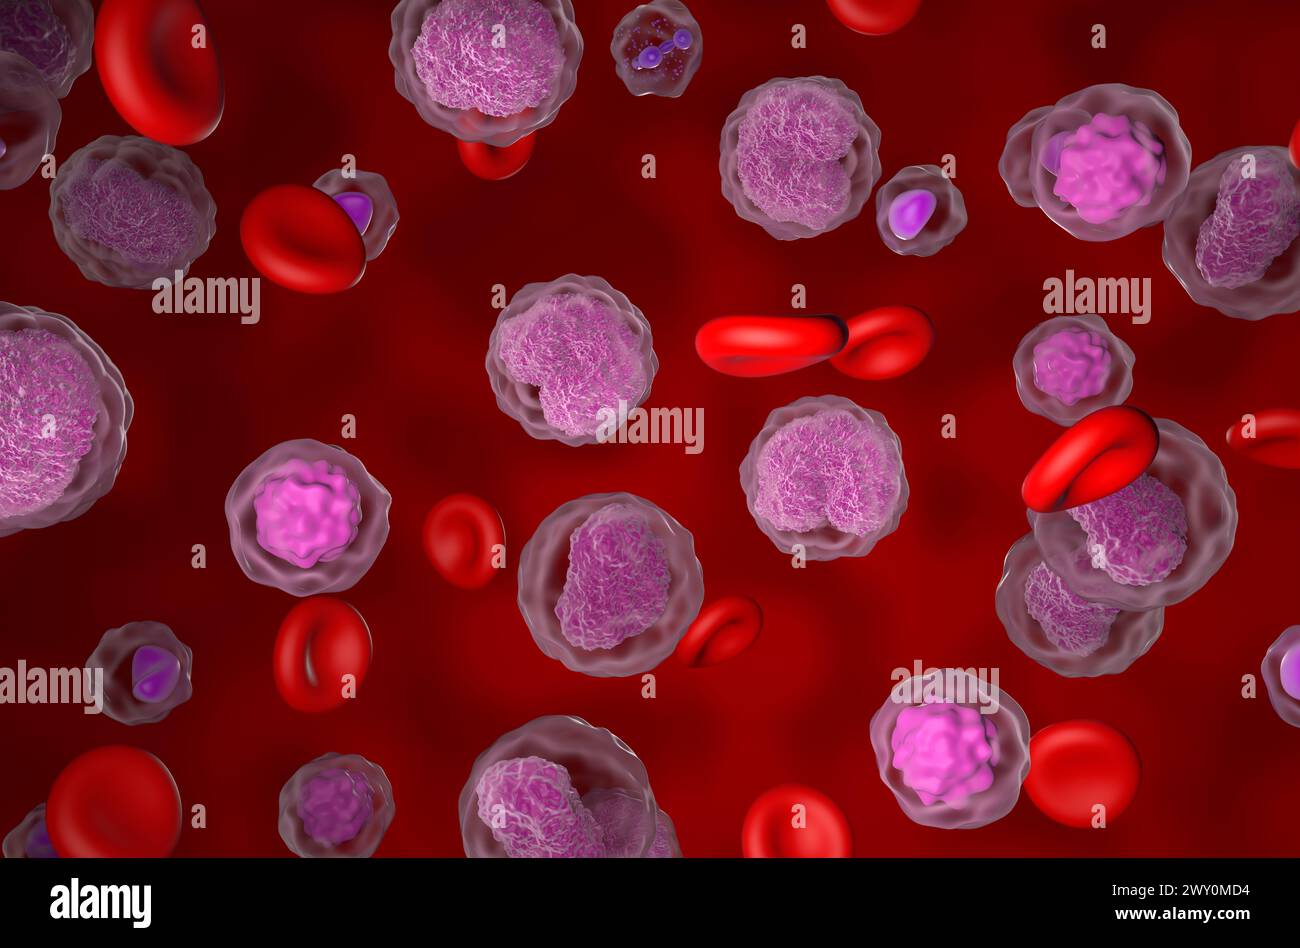 Non-hodgkin lymphoma (NHL) cells in the blood flow - isometric view 3d illustration Stock Photo